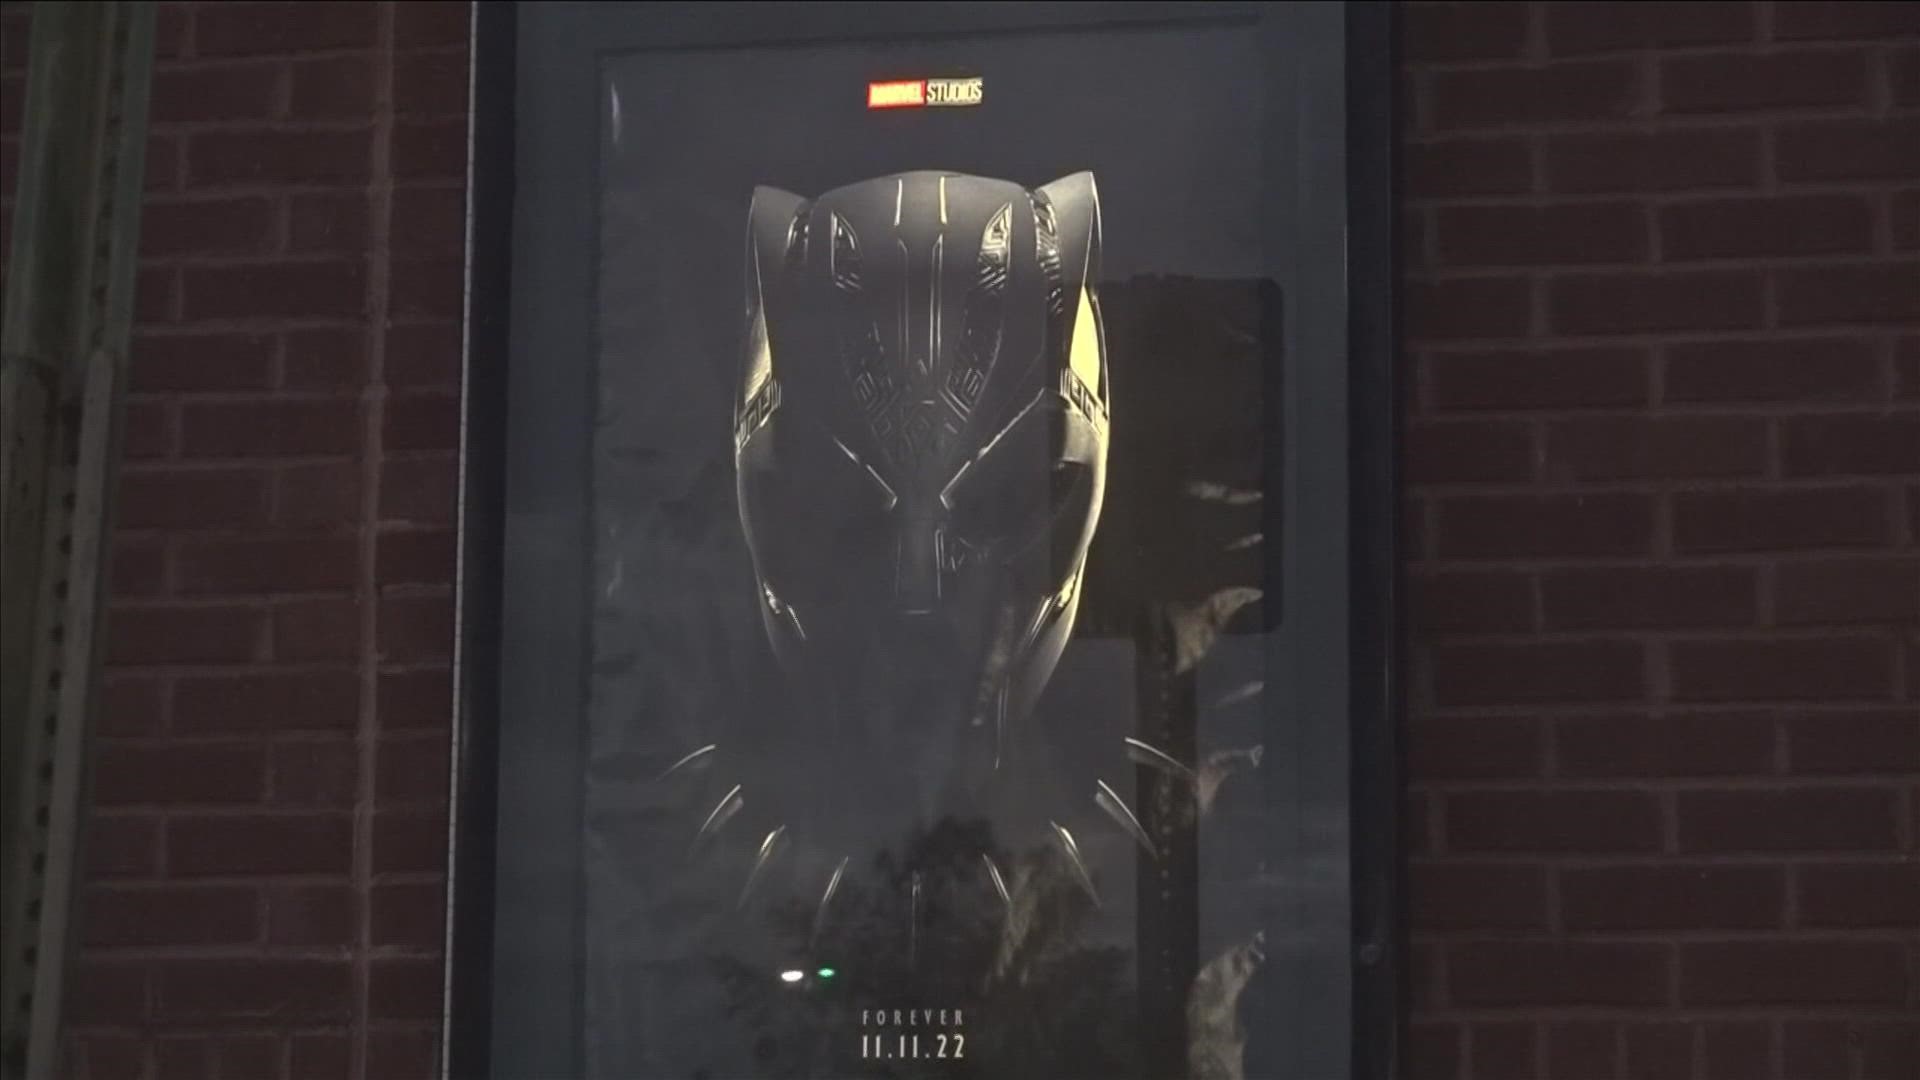 "Black Panther: Wakanda Forever" has brought hundreds of thousands of people around the country to see it. The scene is no different here in the Bluff City.